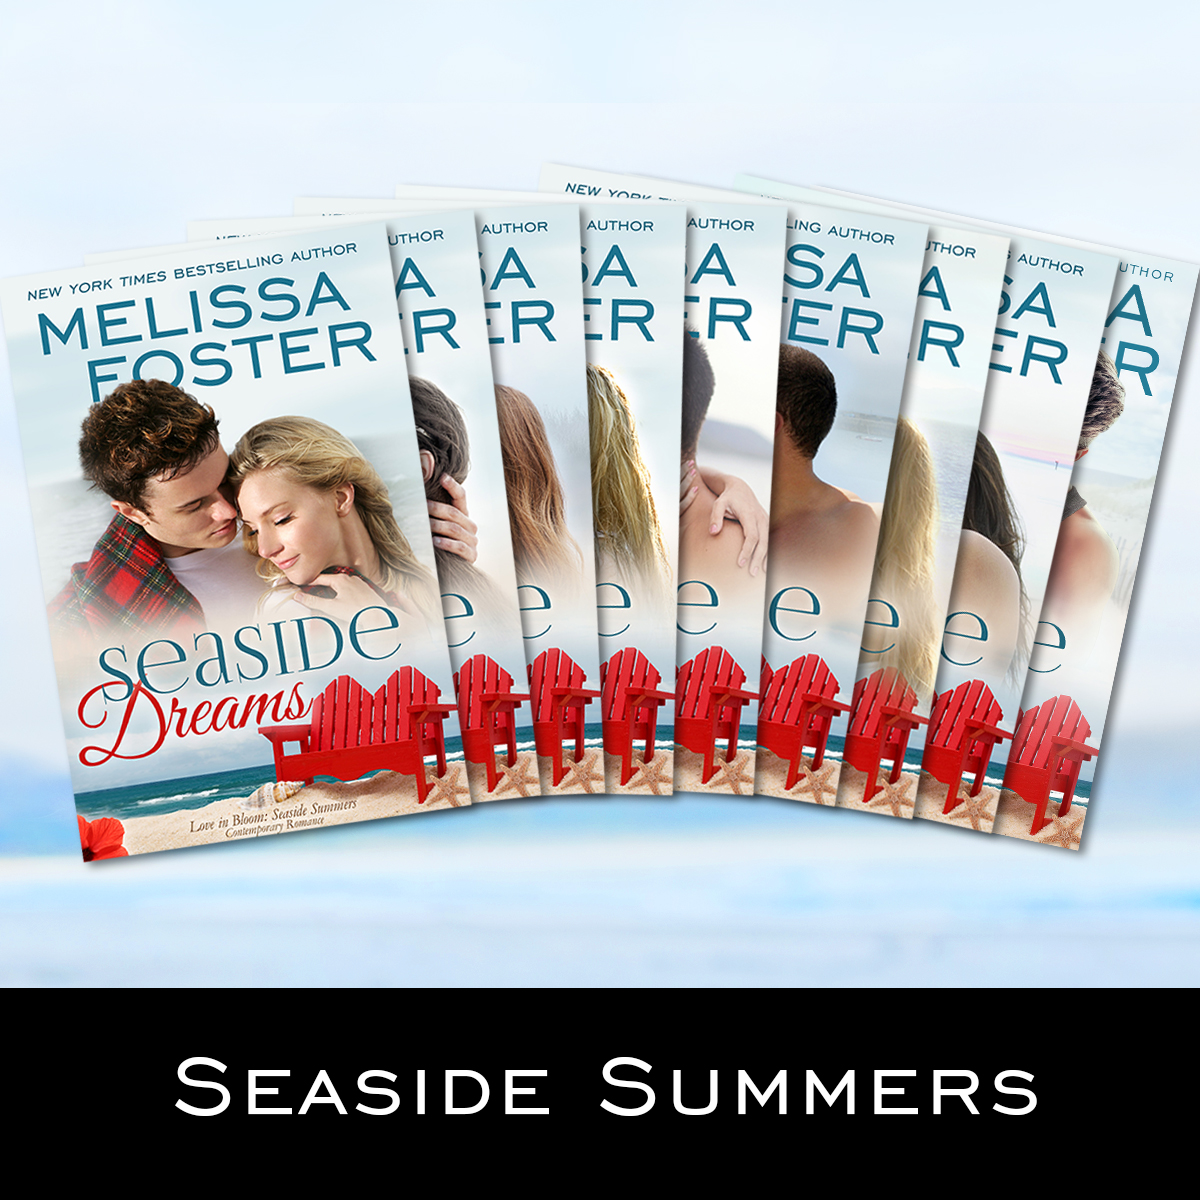 Seaside Summers series by Melissa Foster